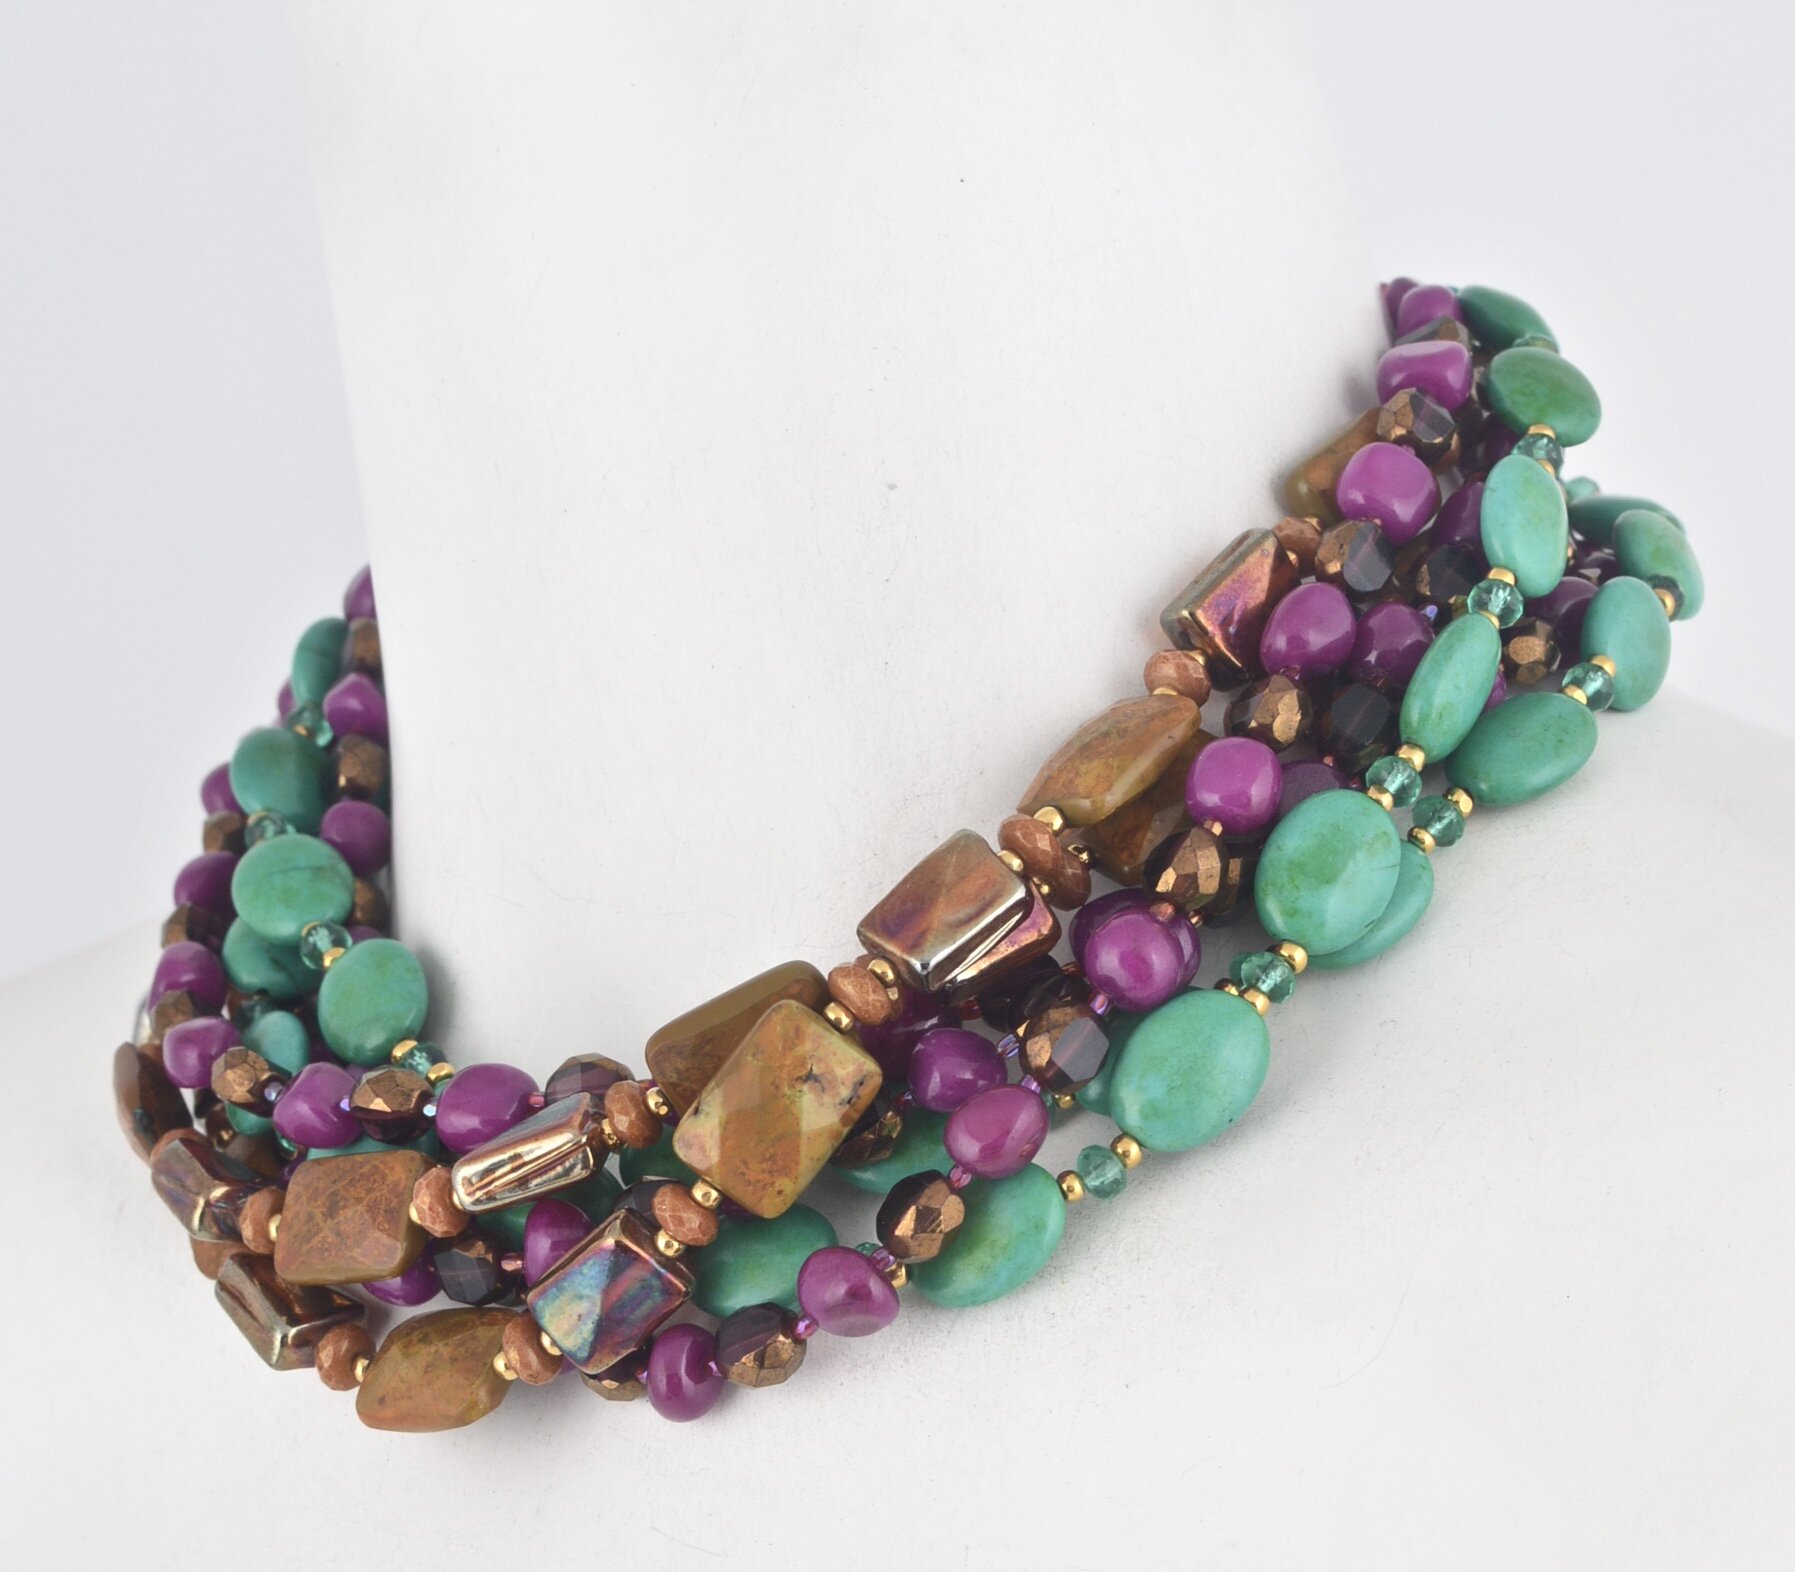 Fashion Details about NWT J.Crew Twisty beaded Mixed Metal necklace $118  DE3183202